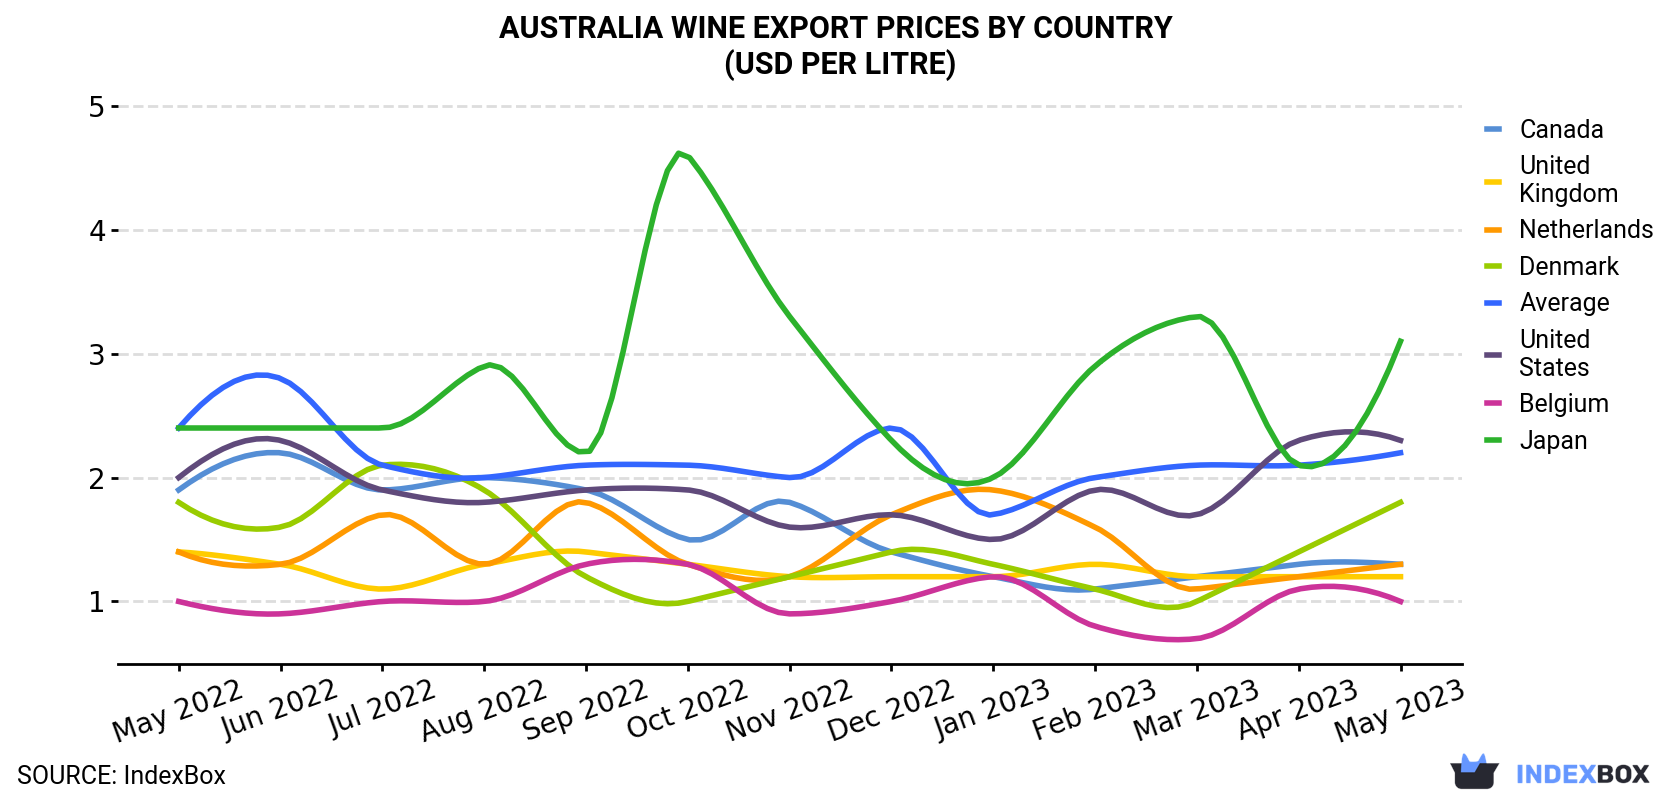 Australia Wine Export Prices By Country (USD Per Litre)